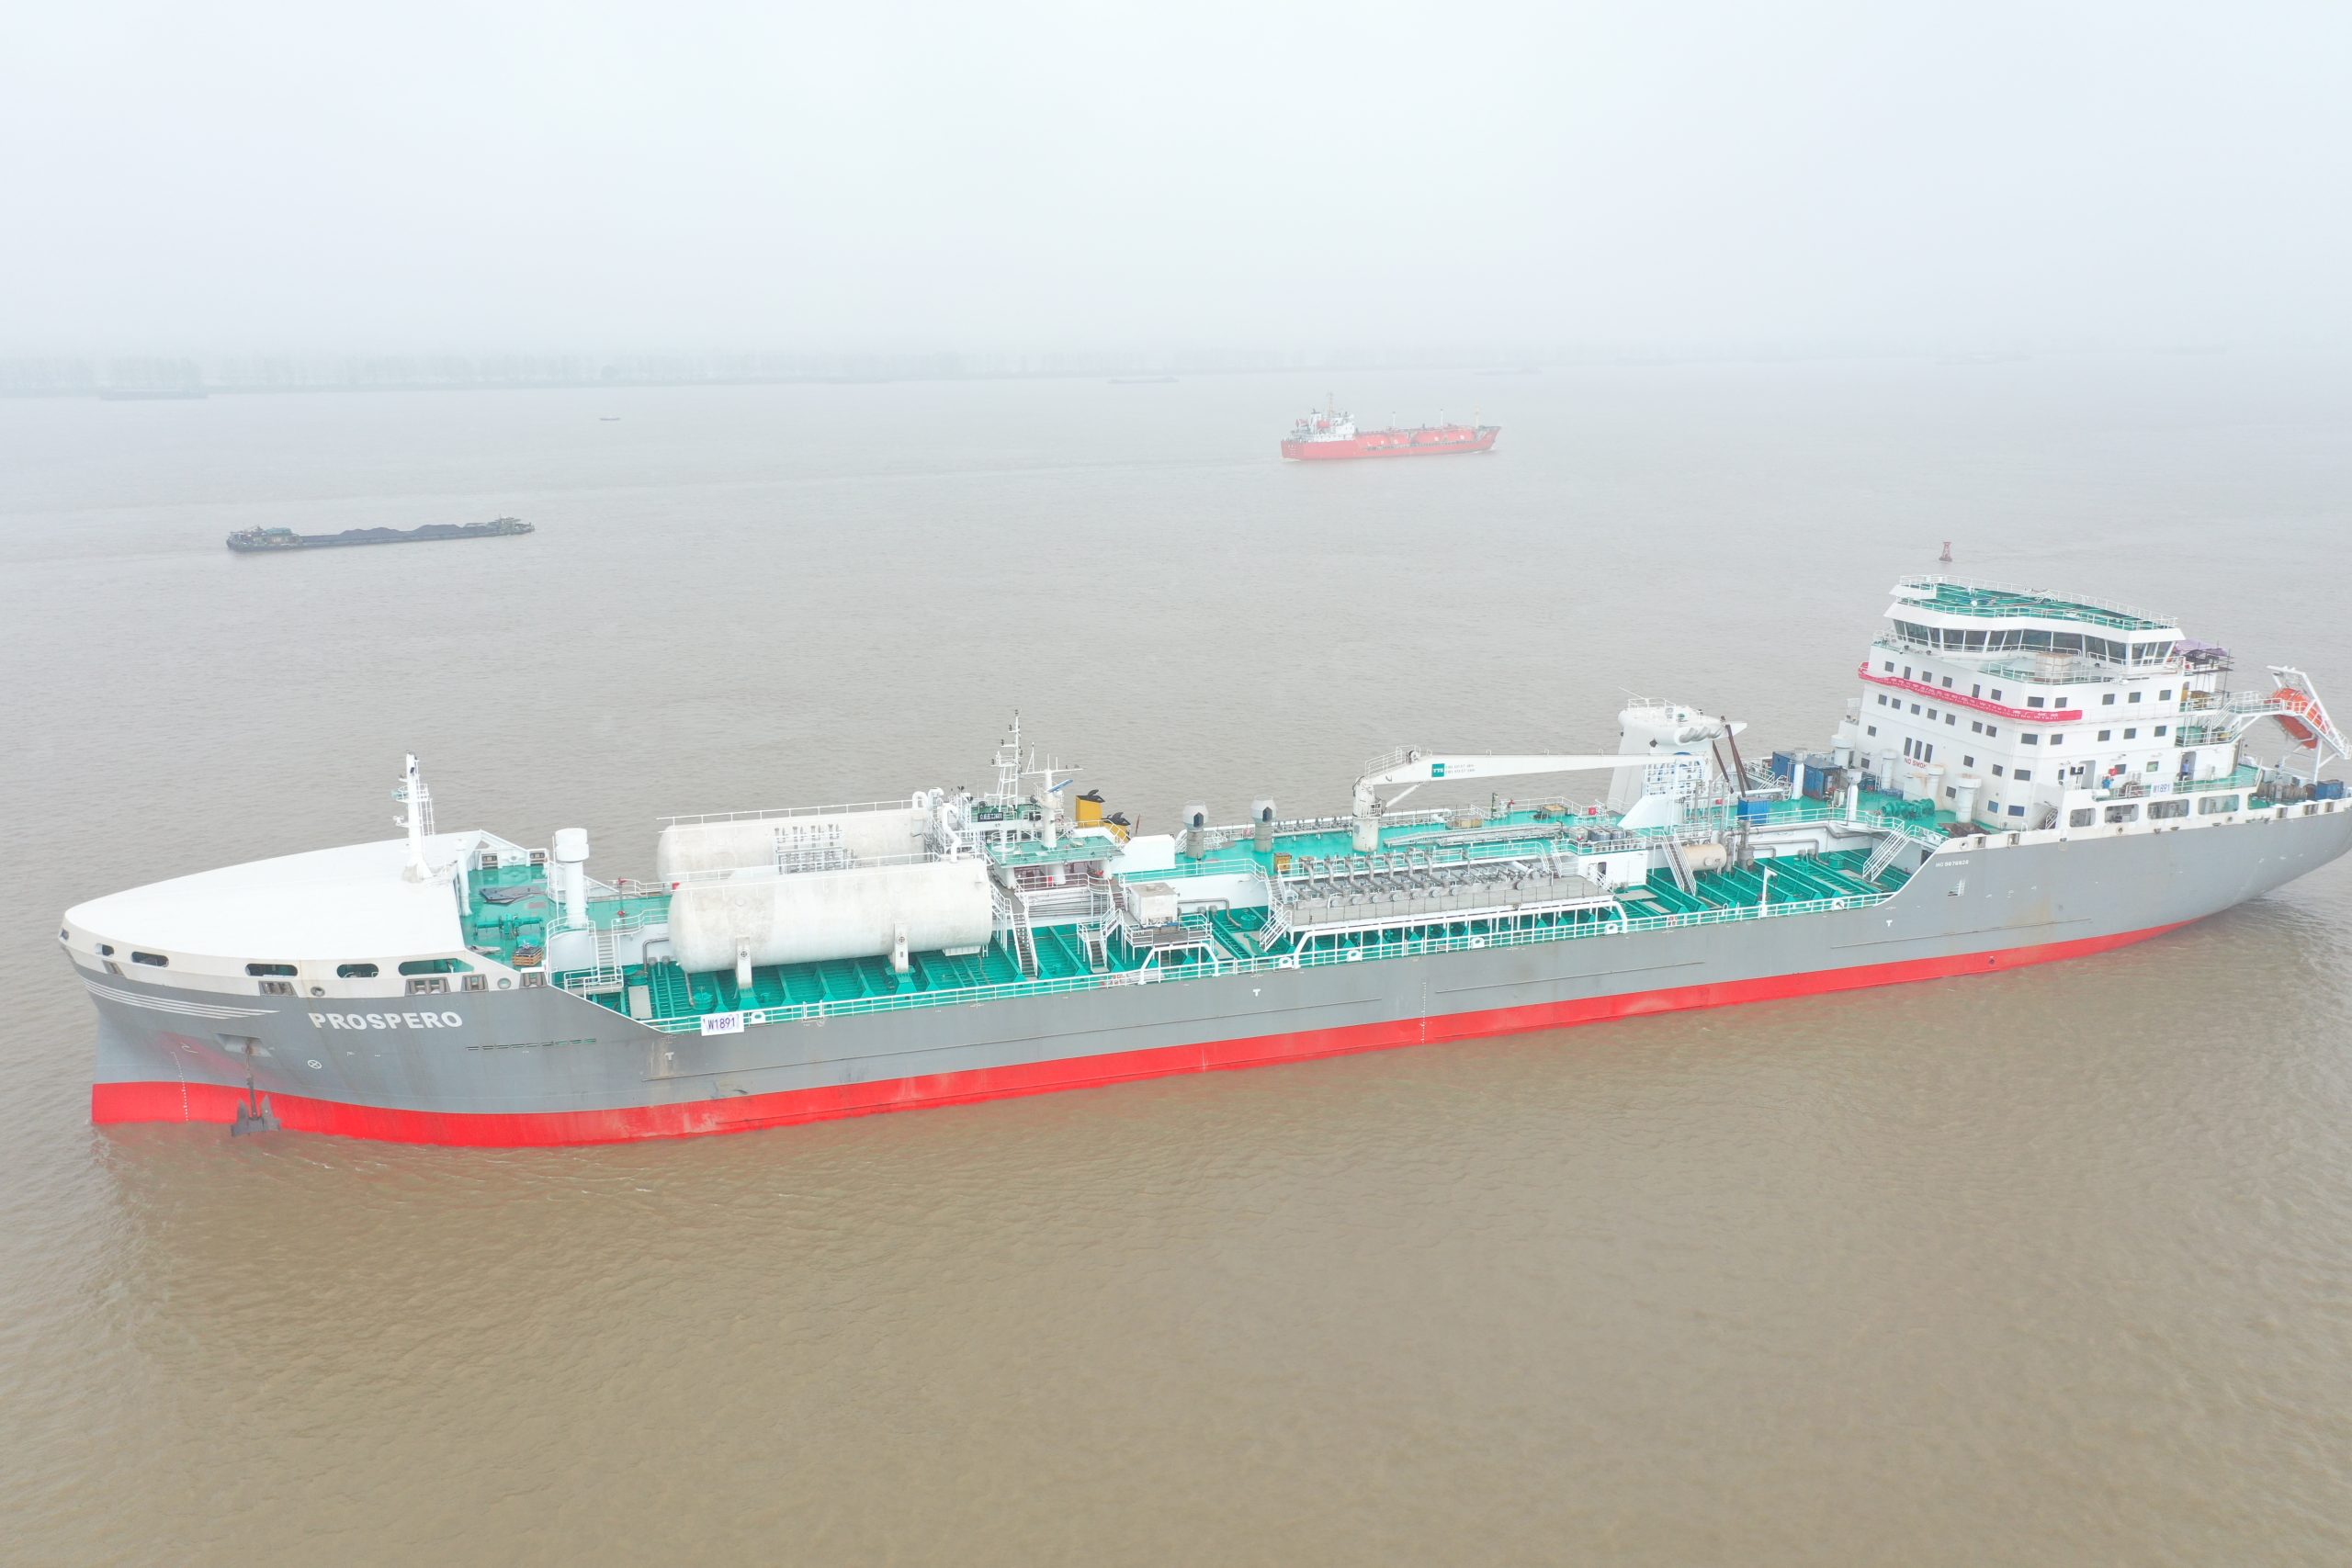 Donsotank welcomes LNG-powered Prospero in its fleet